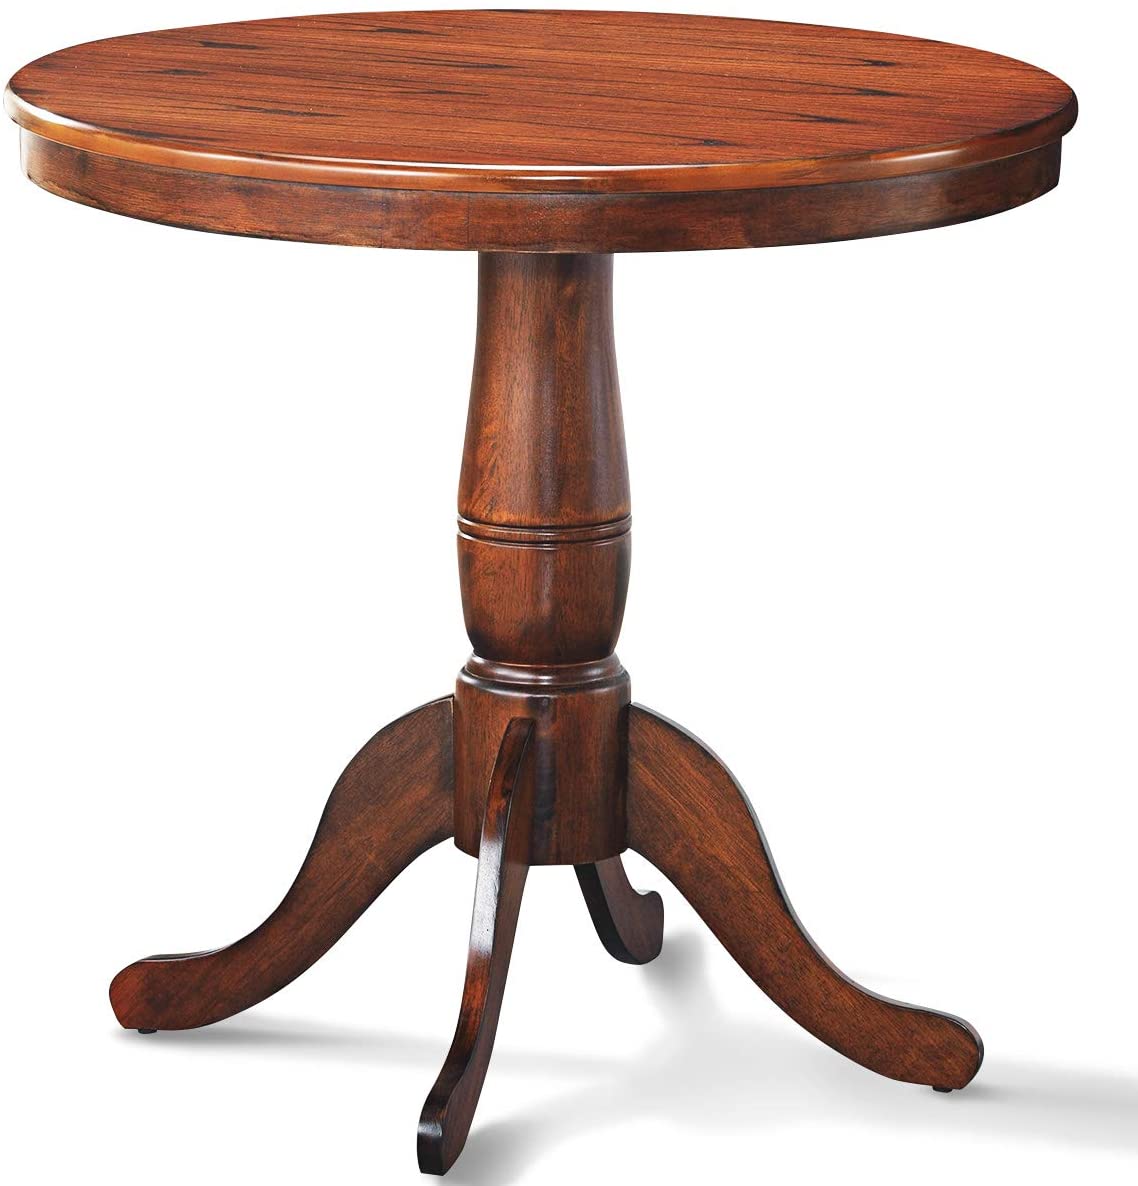 B082YZT4RM Giantex Table 30" Wooden Round Pub Pedestal Side Table, Adjustable Foot Pads, Spacious Table Top, Multi-Purpose Furniture for Bar, Kitchen, Dining Room, Restaurant End Table (30 Inch)